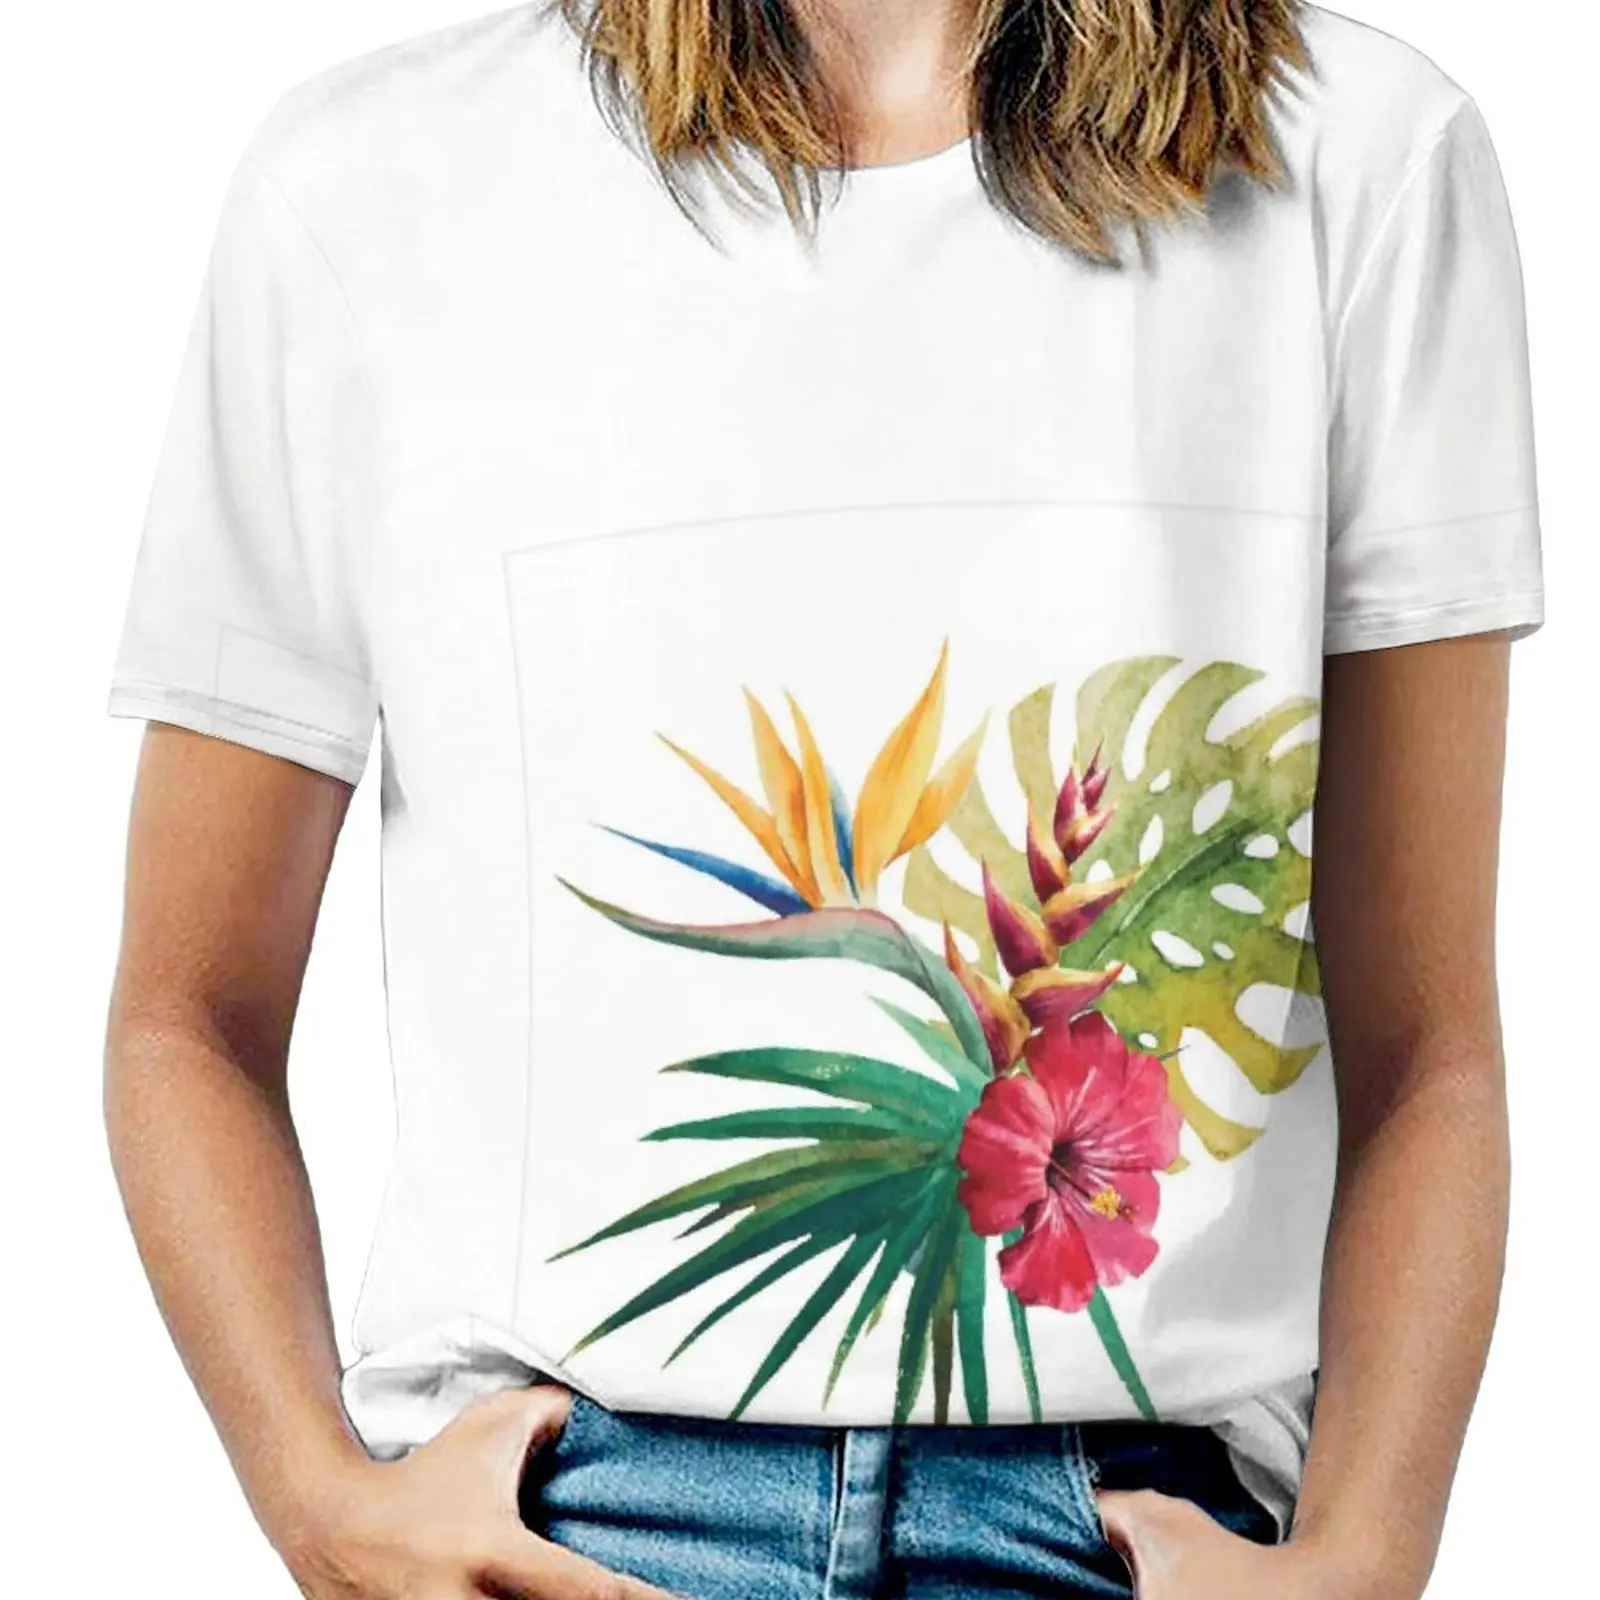 

Wild Tropical Orchid Flower Large Leaves Exotic Tropic Petals Picture T-shirt Crewneck Sports Funny Vintag Top Tee Novelty Fit